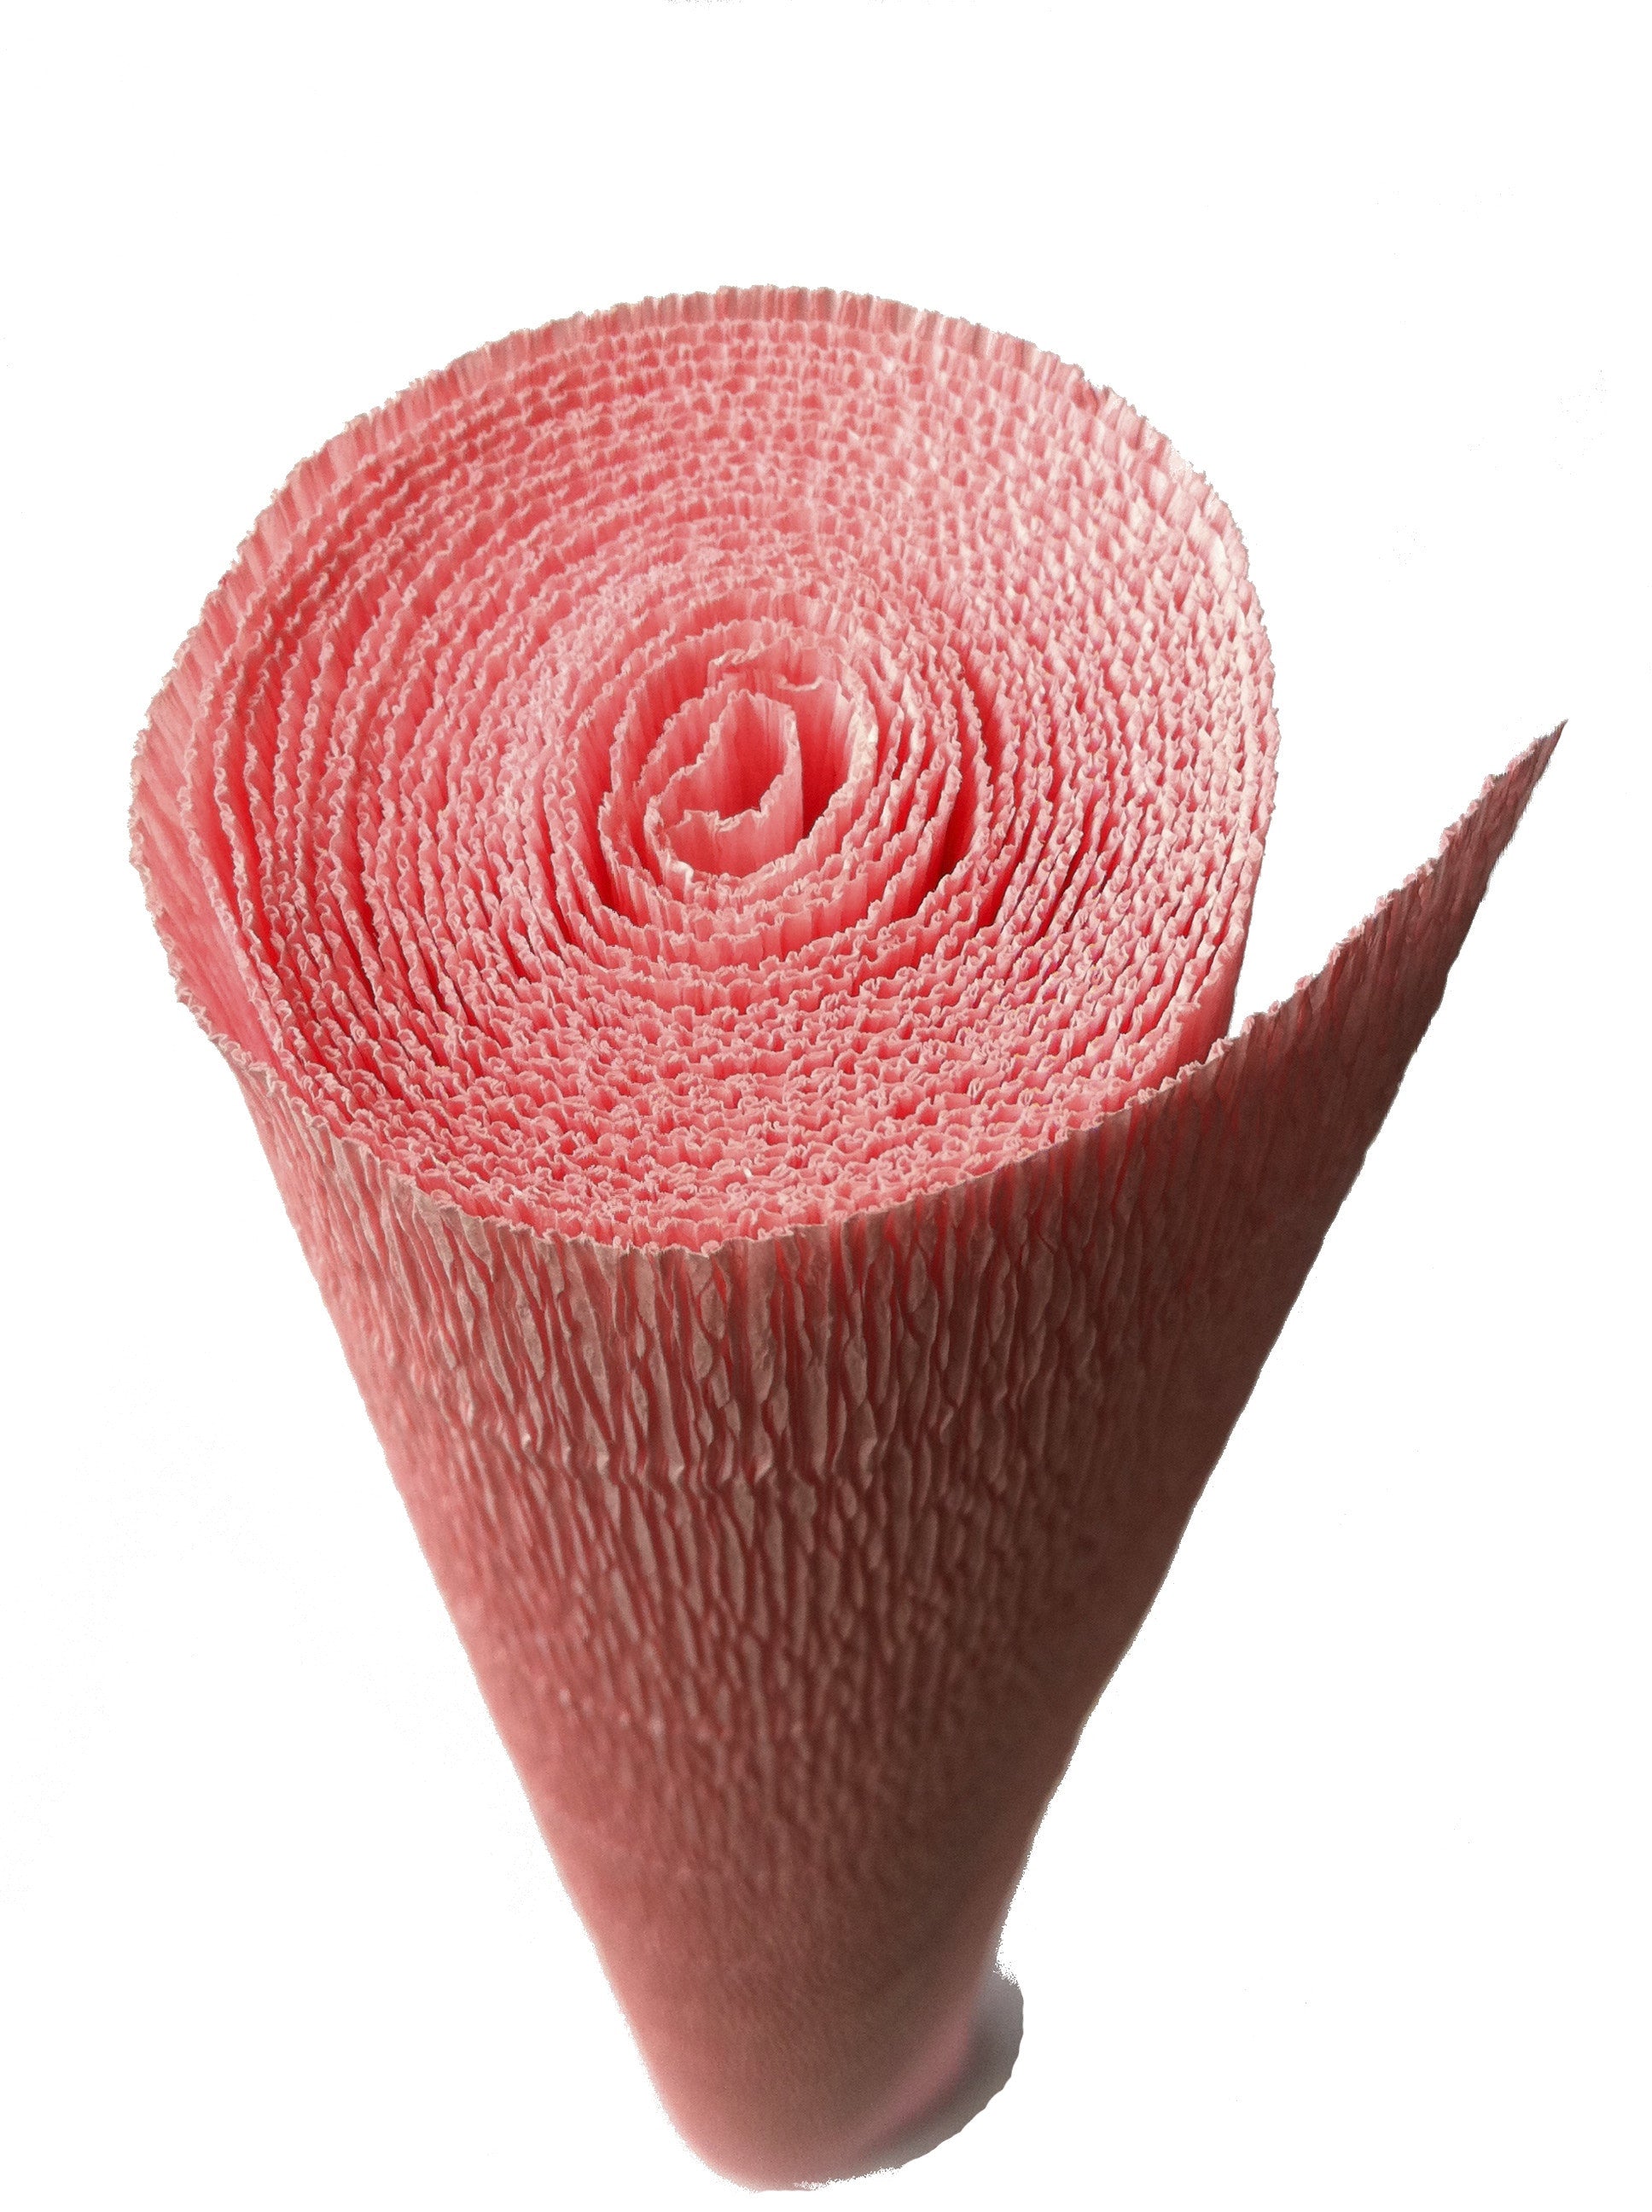 Crepe Paper Store - Quality crepe paper, tissue and craft, Italian Crepe  Paper Roll